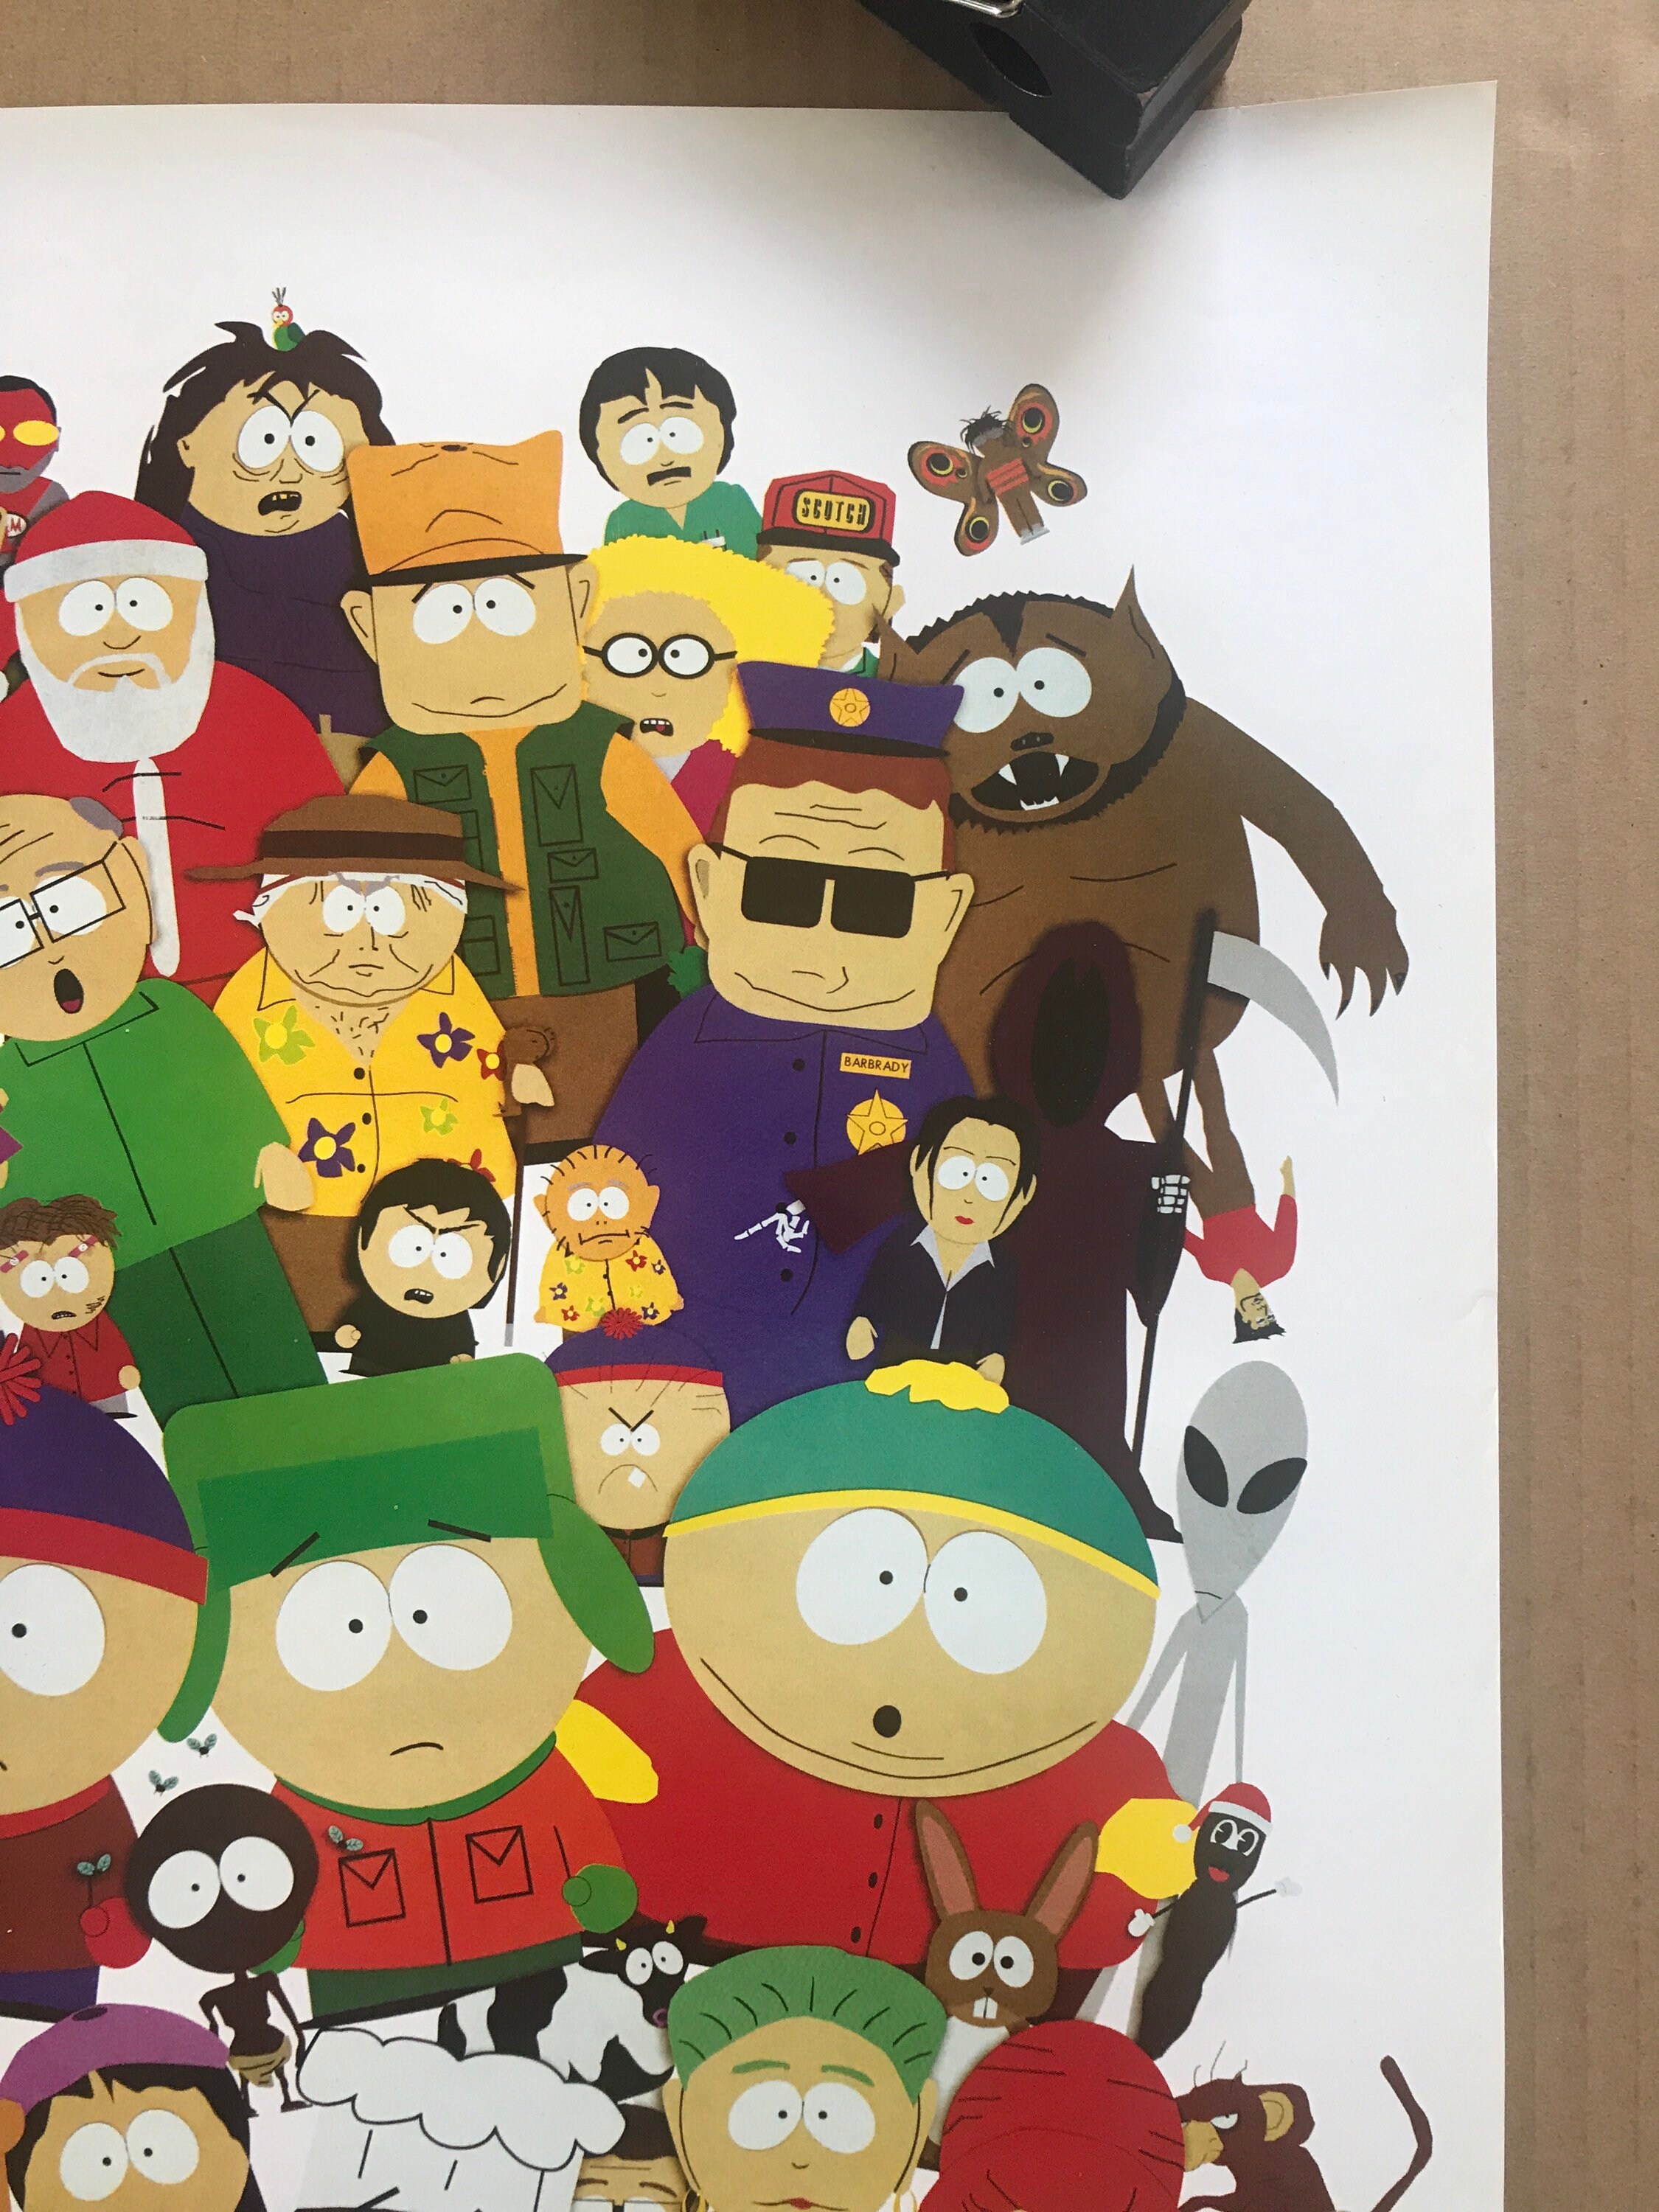 South Park characters Poster by twozombiesstore